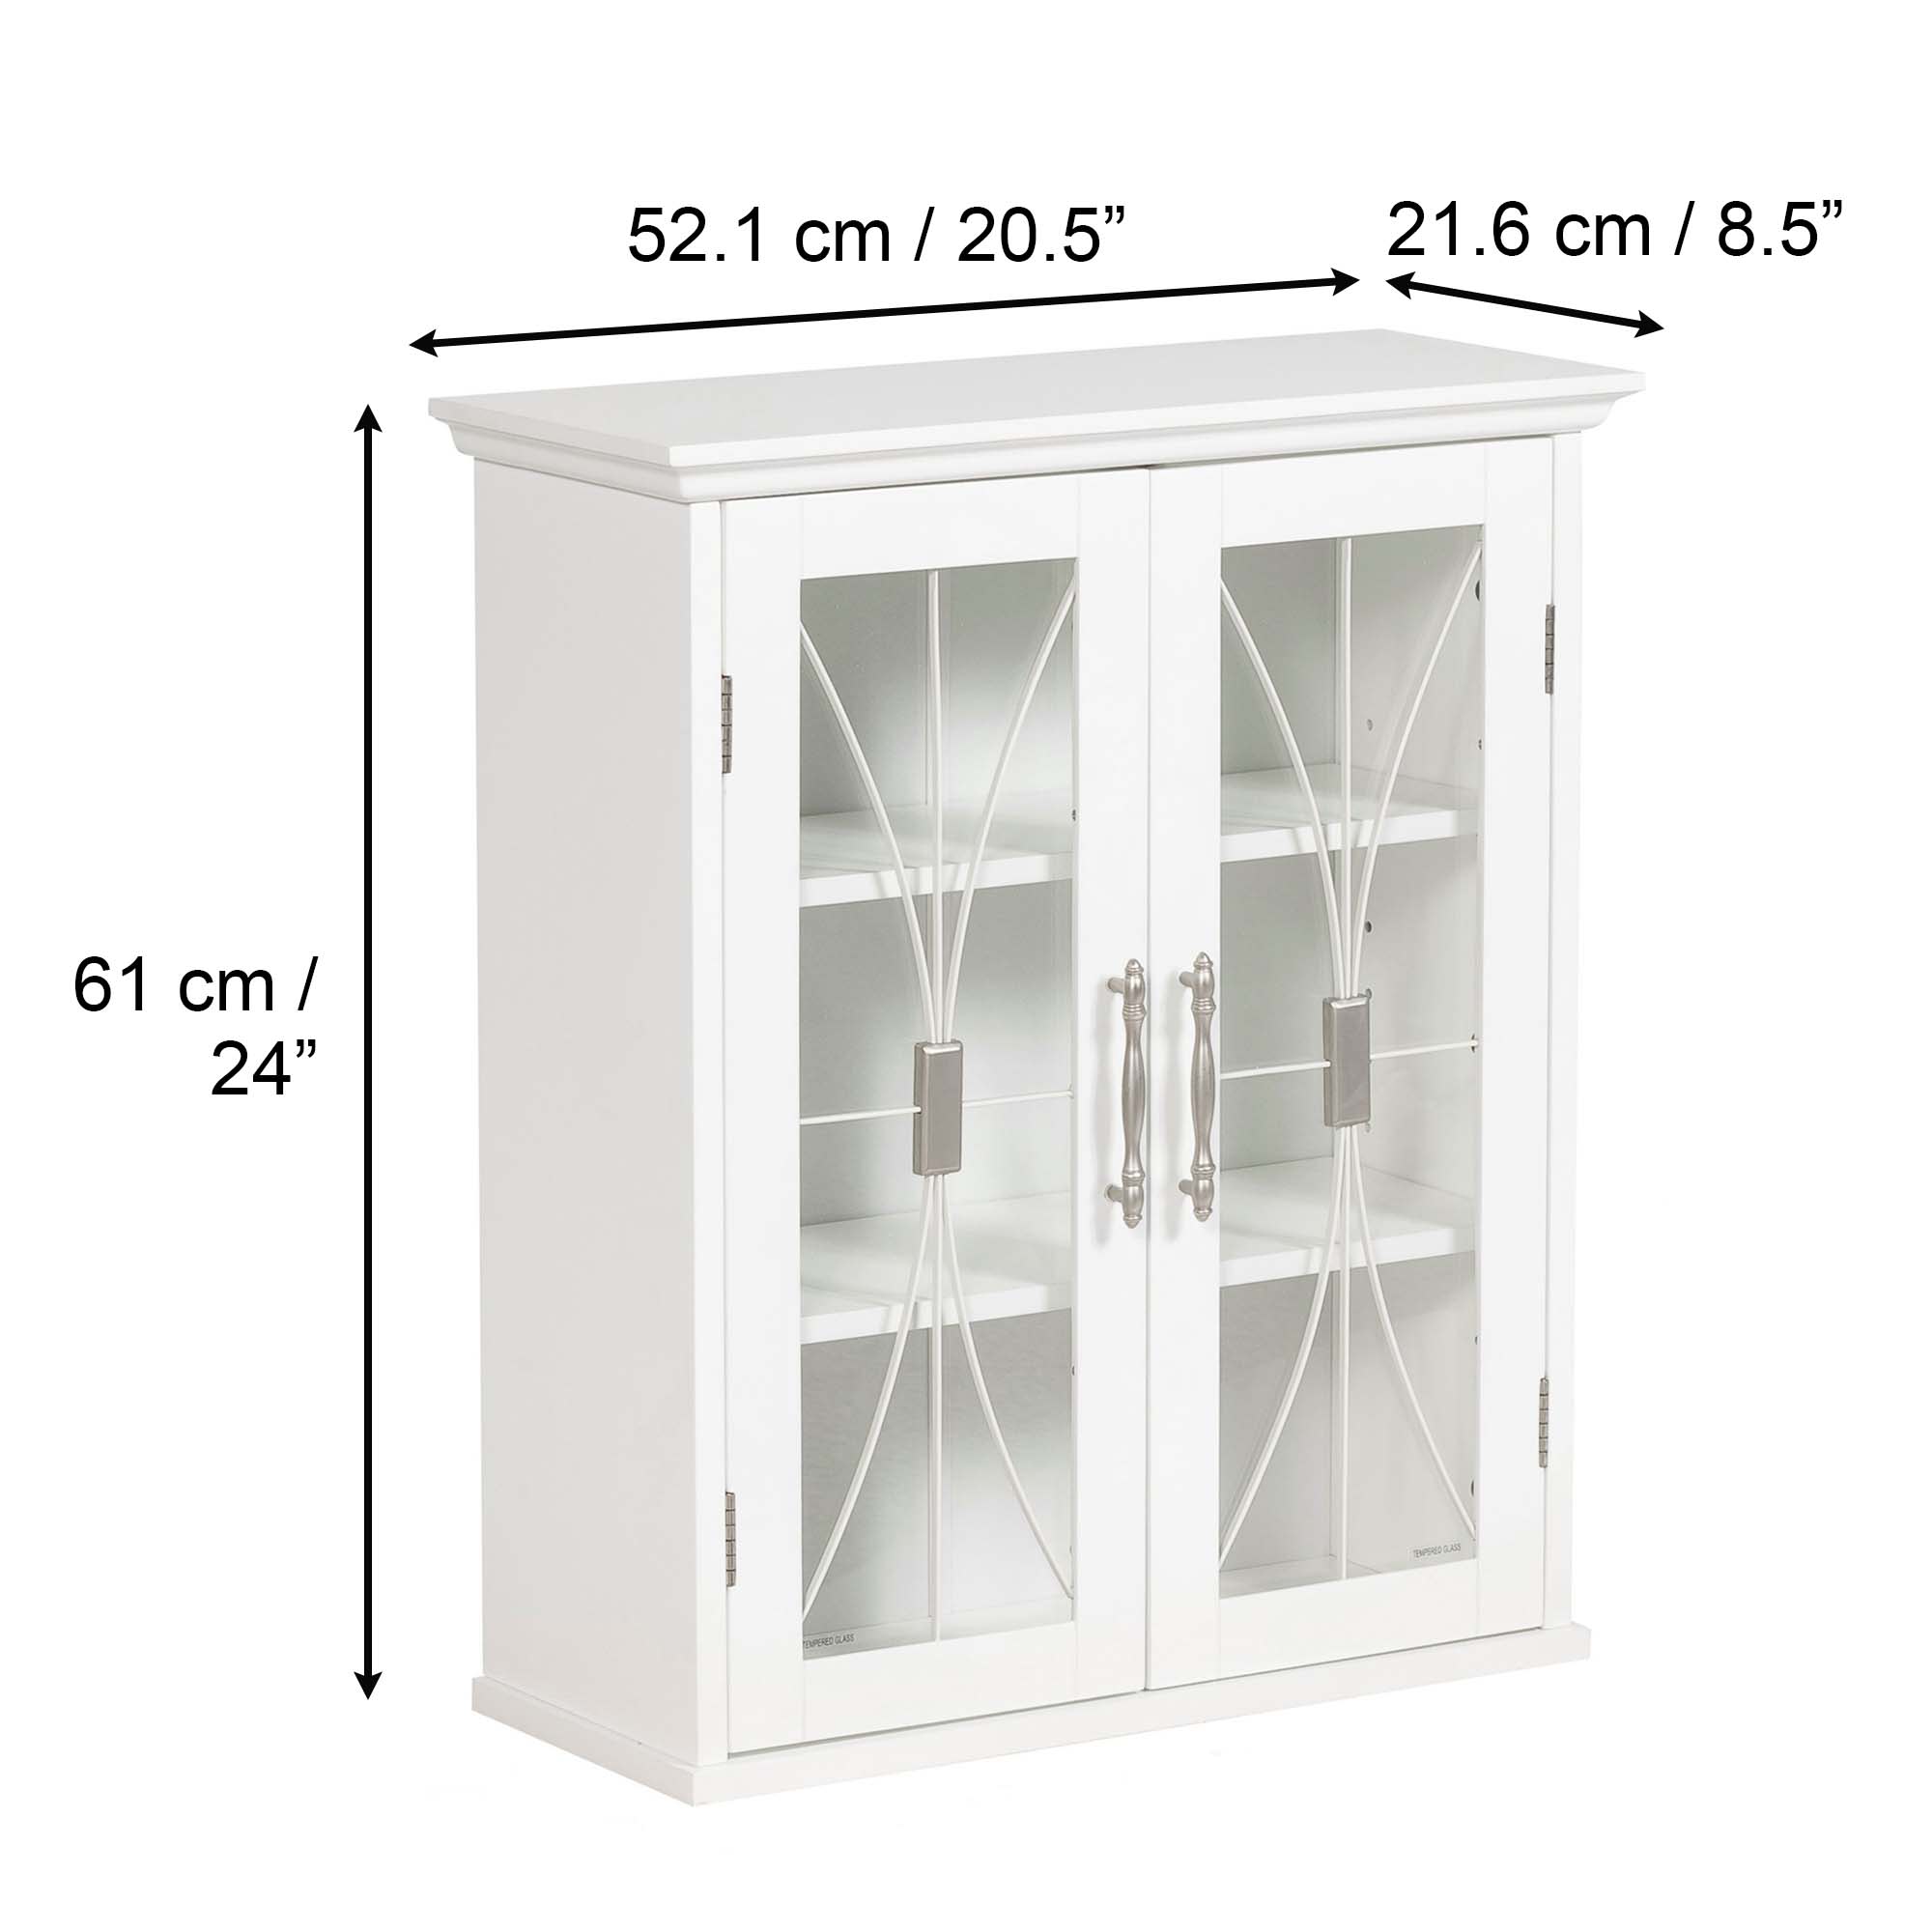 Teamson Home Delaney Removable Wooden Wall Cabinet with 2 Doors, White